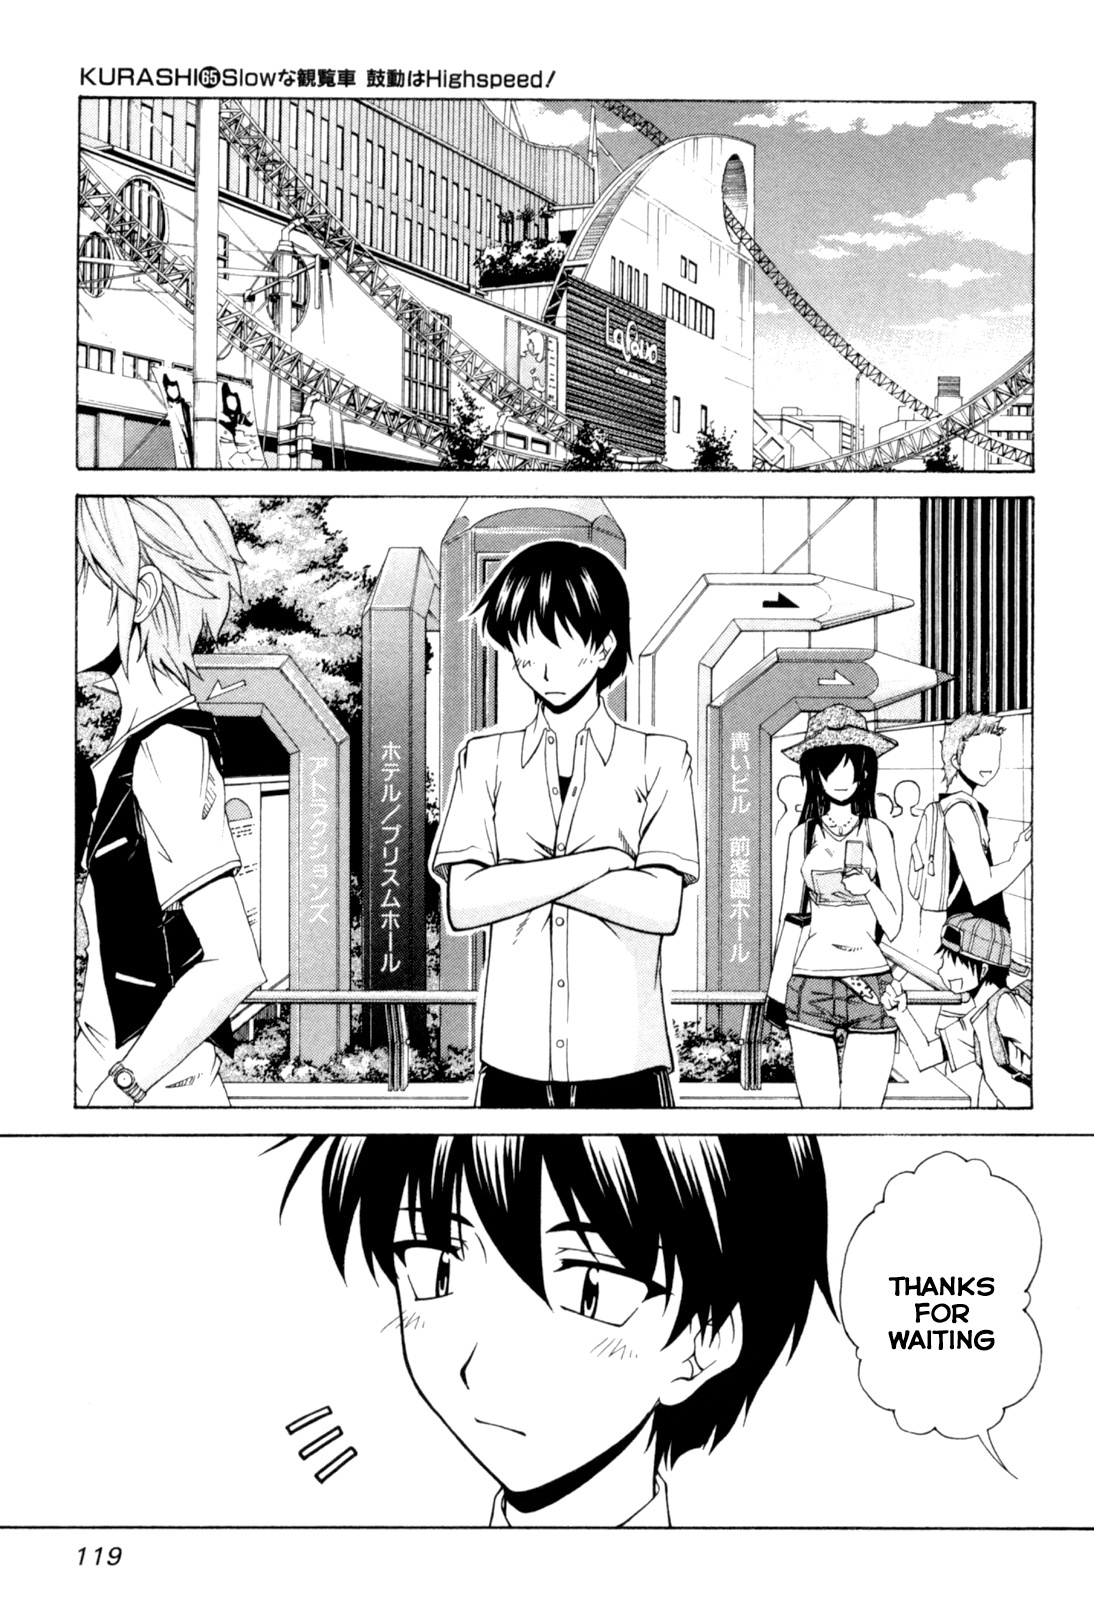 Tona-Gura! Vol.10 Chapter 65: Slow Ferris Wheel But The Heart Is Beating At Highspeed! - Picture 1